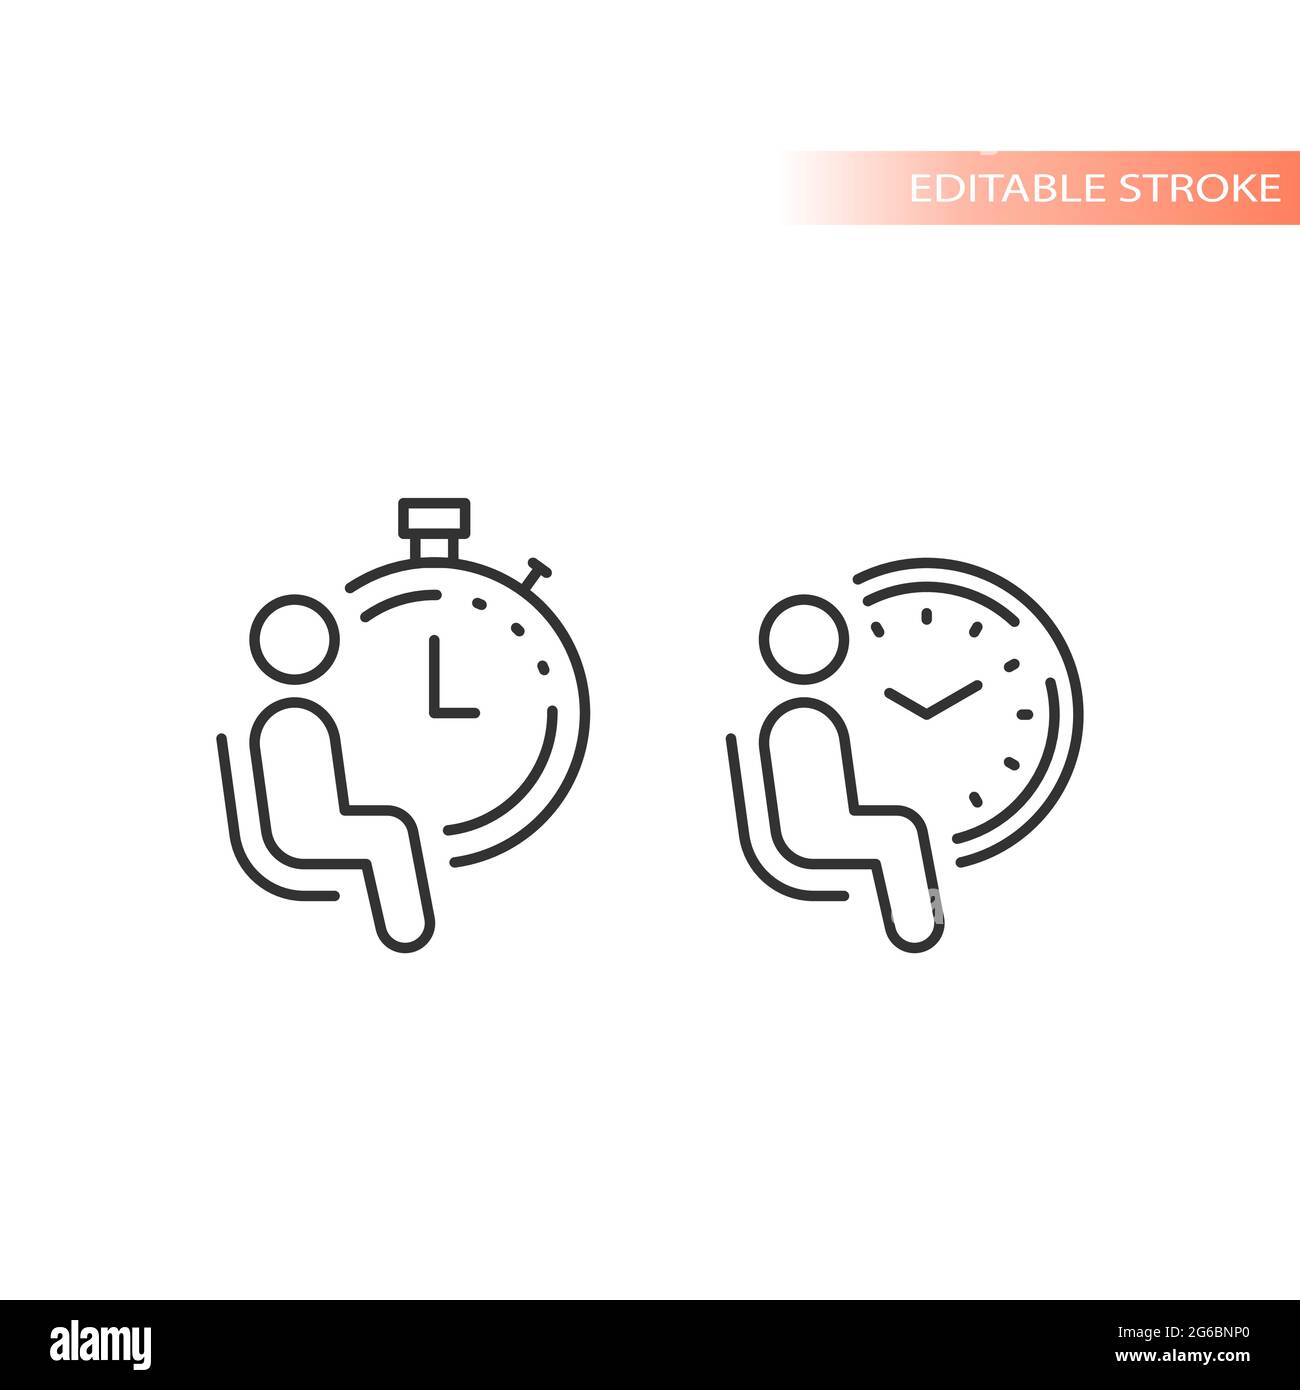 Waiting room line vector icon. Man sitting in a chair with a clock outline, editable stroke. Stock Vector